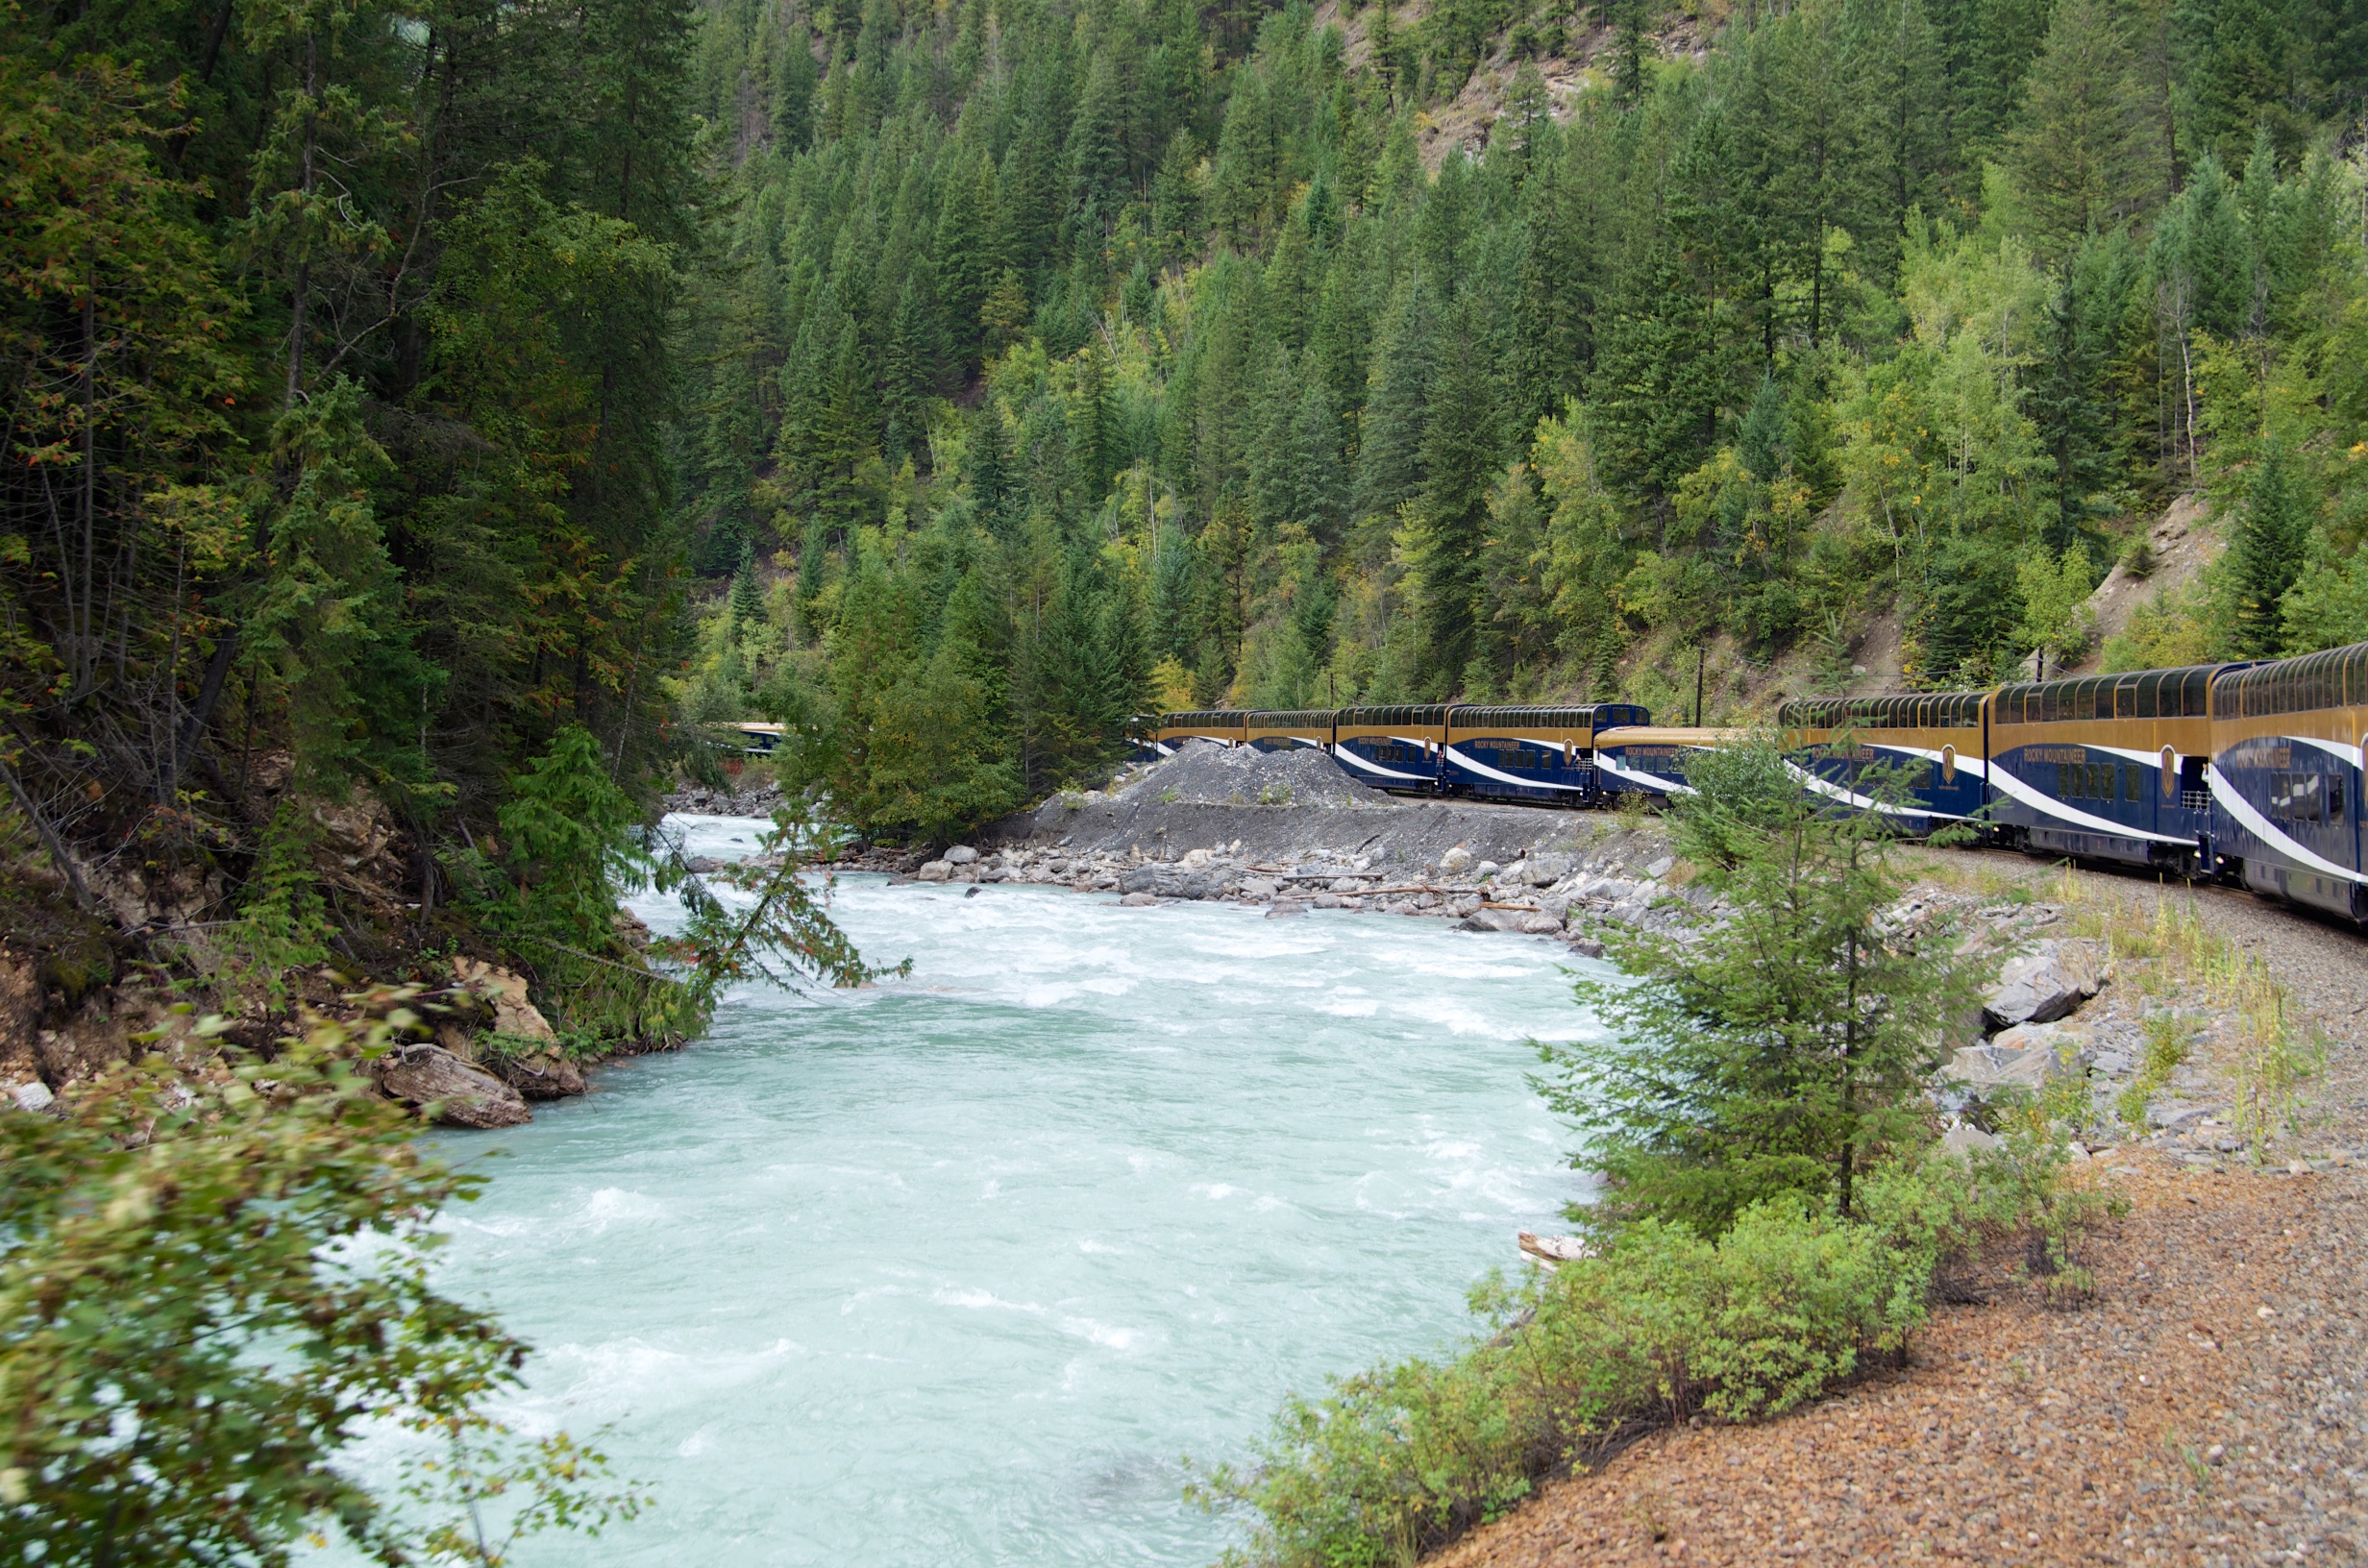  Kicking Horse River from Rocky Mountaineer, British Columbia, Canada 